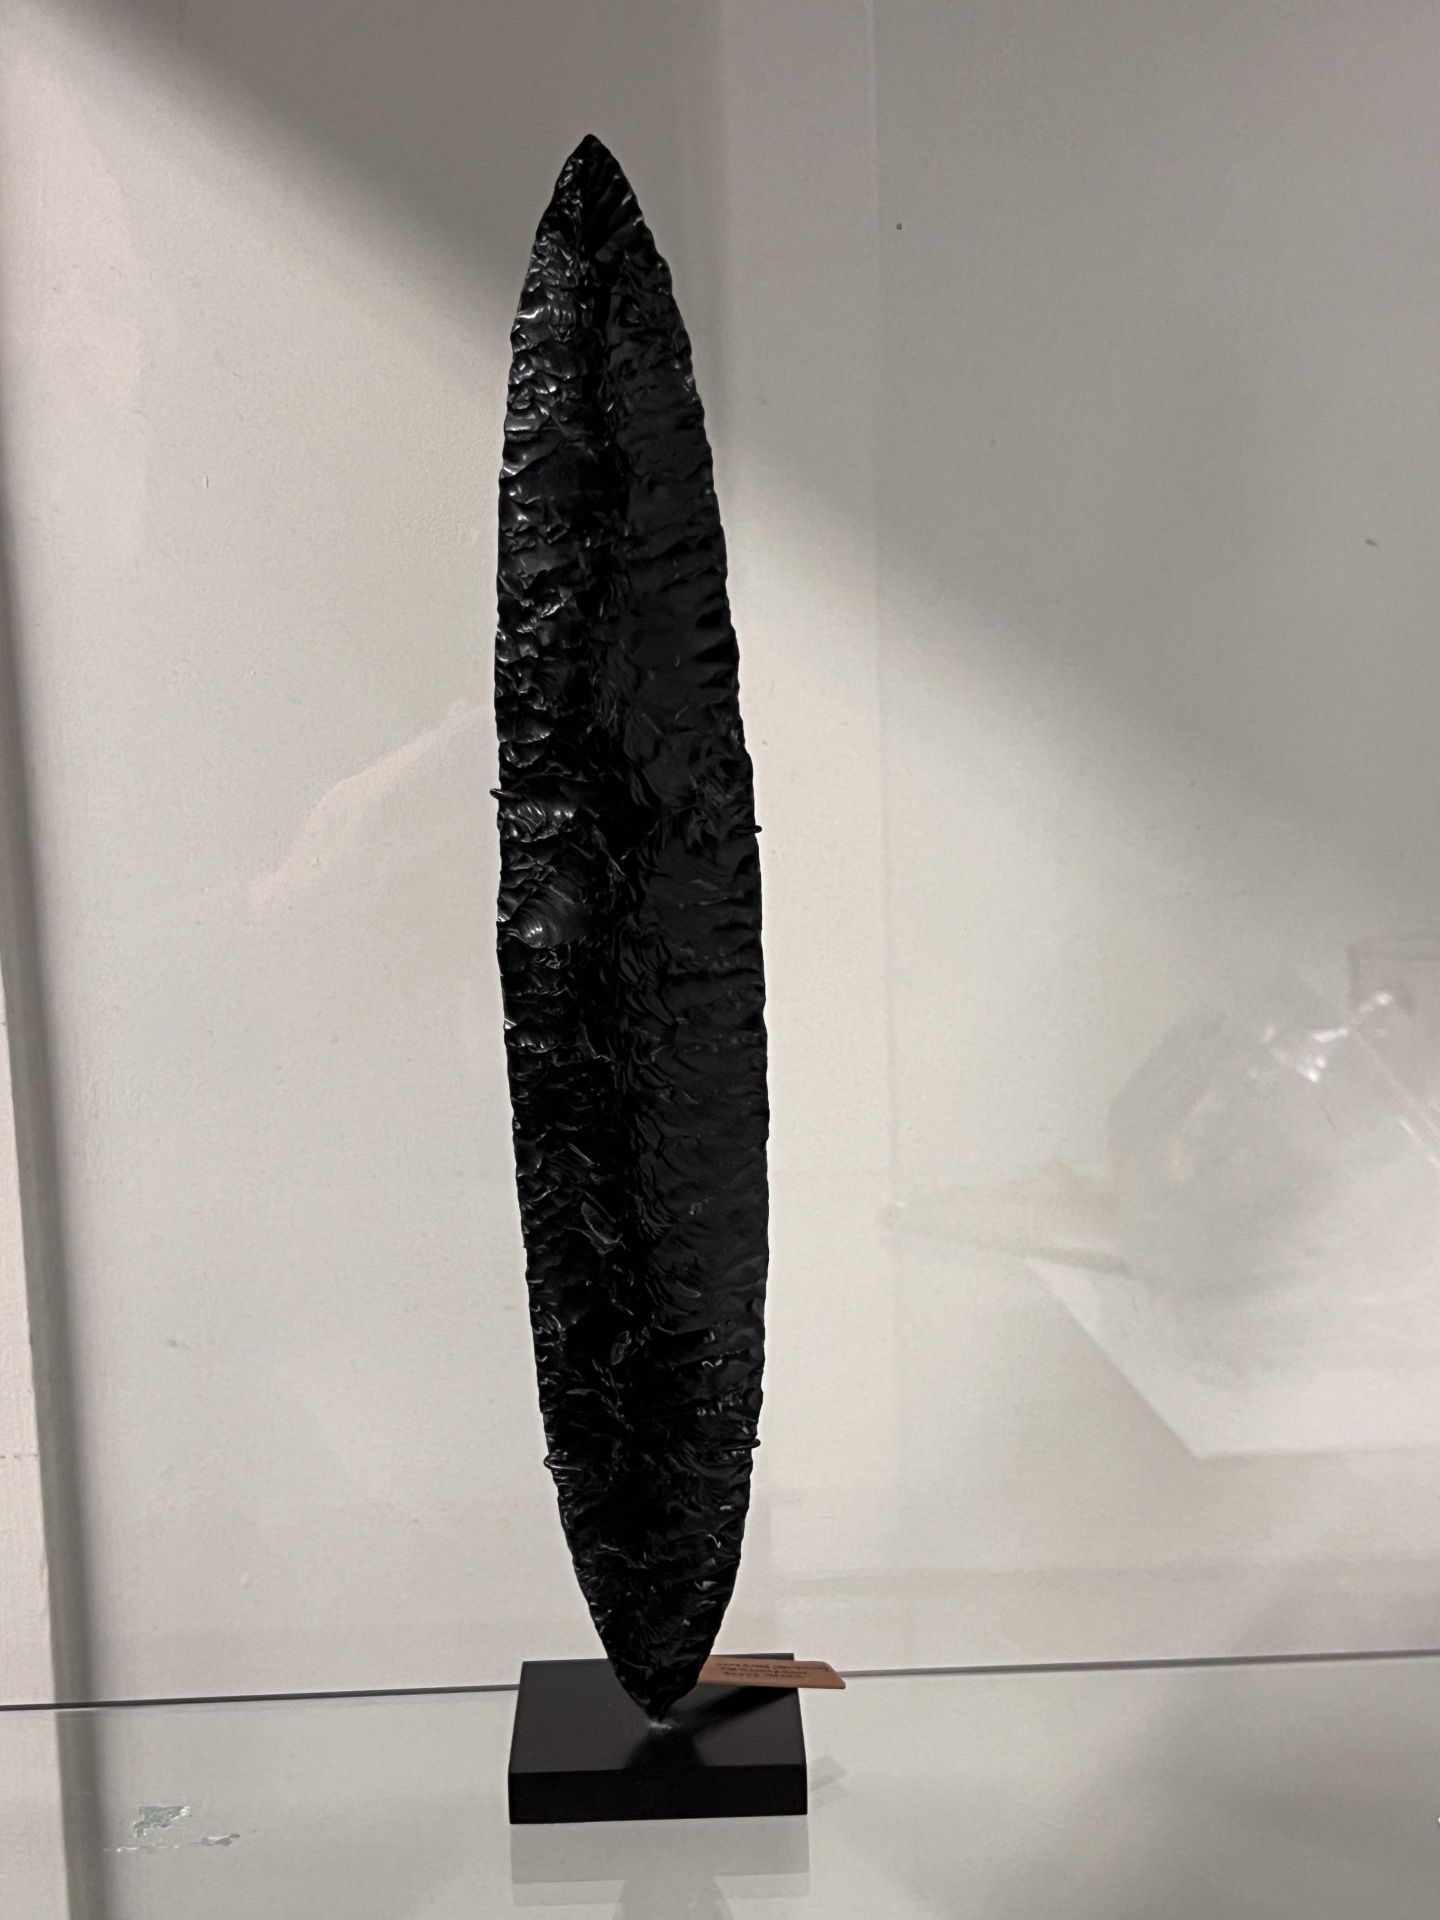 Central Mexico, Michoacan, an obsidian knife, possibly 500 BC;